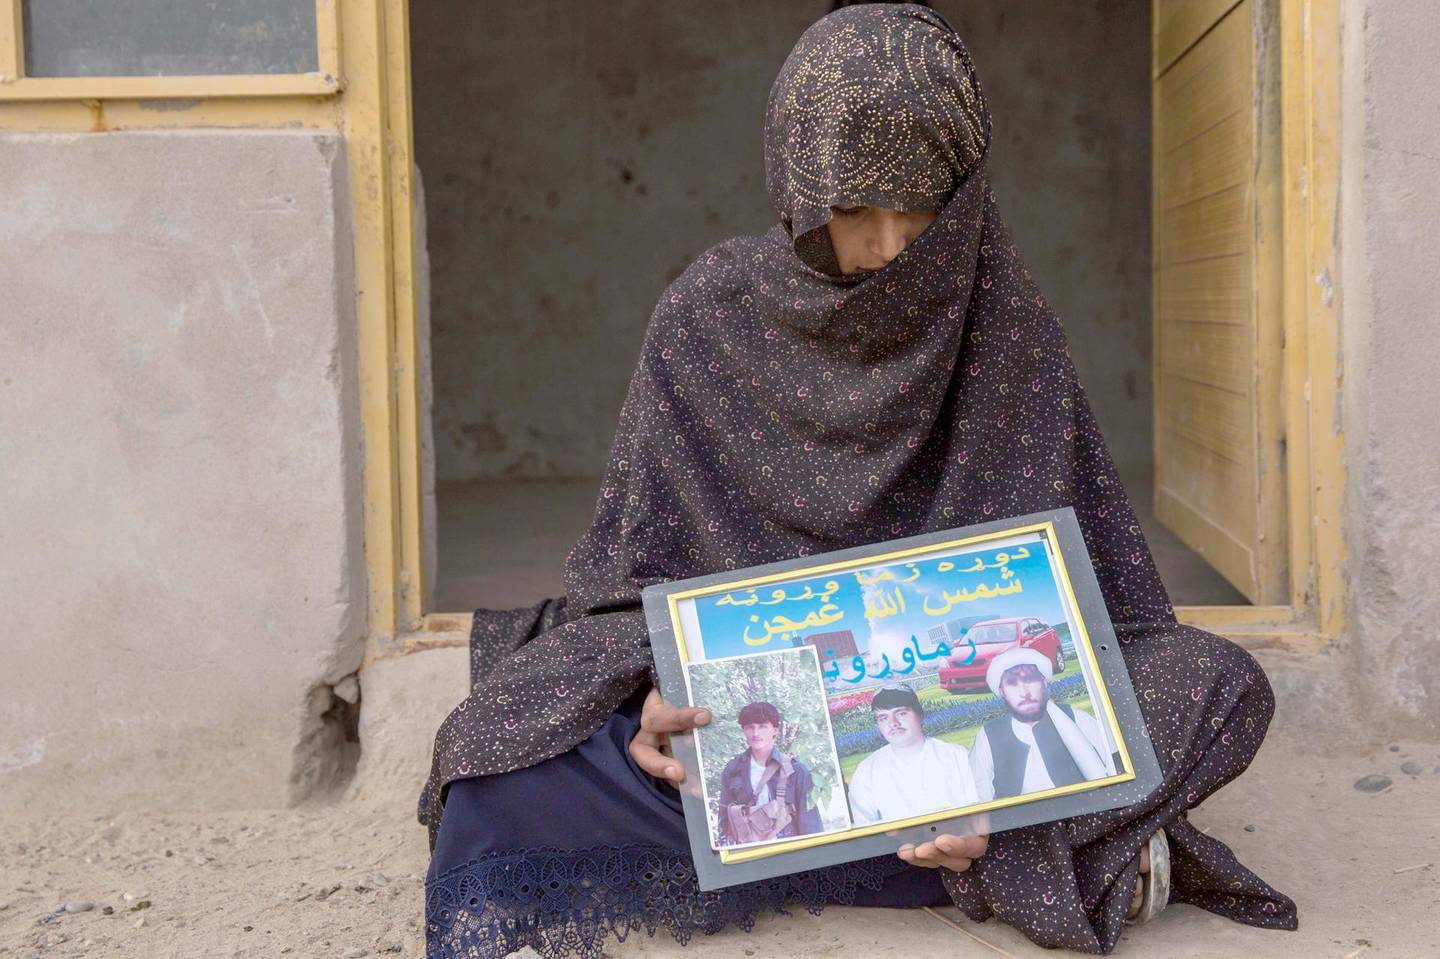 Covering her face, Khadija, 19, holds a photo of her three husbands: the Taliban fighter to the right, the police officer to the left, and her current husband in the middle. She lives outside of Helmand's provincial capital Lashkargar. Photo by Stefanie Glinski